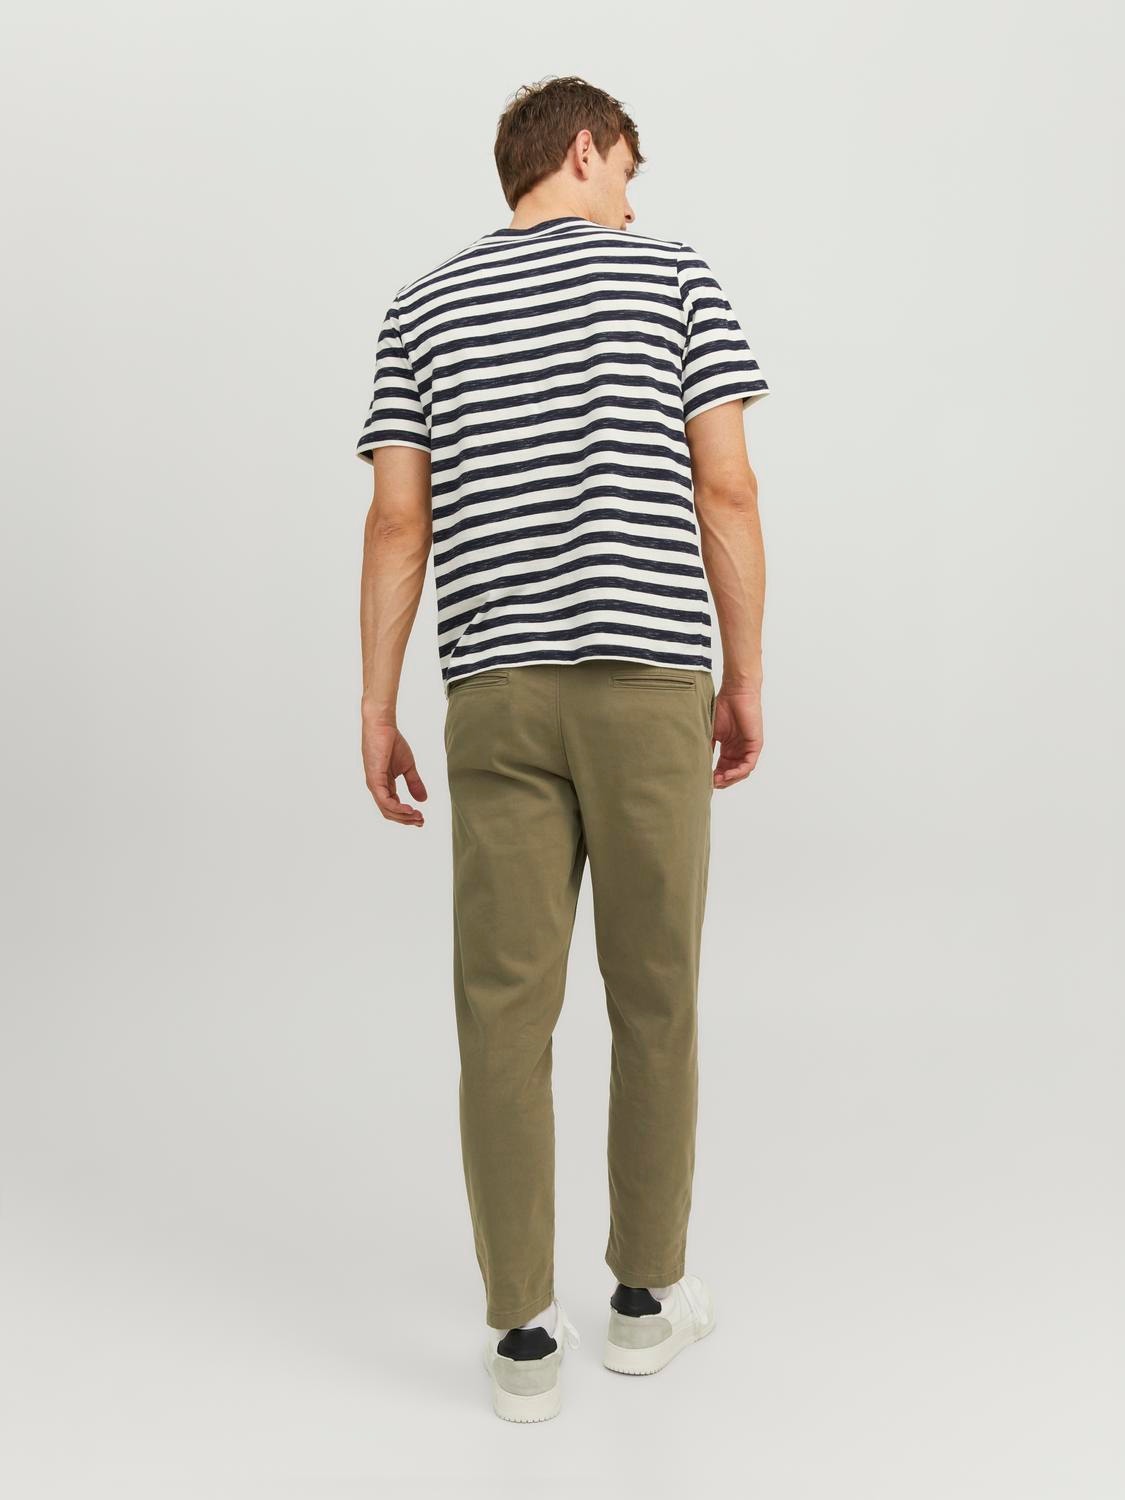 Jack & Jones Tapered Fit Chino trousers -Dusty Olive - 12242188